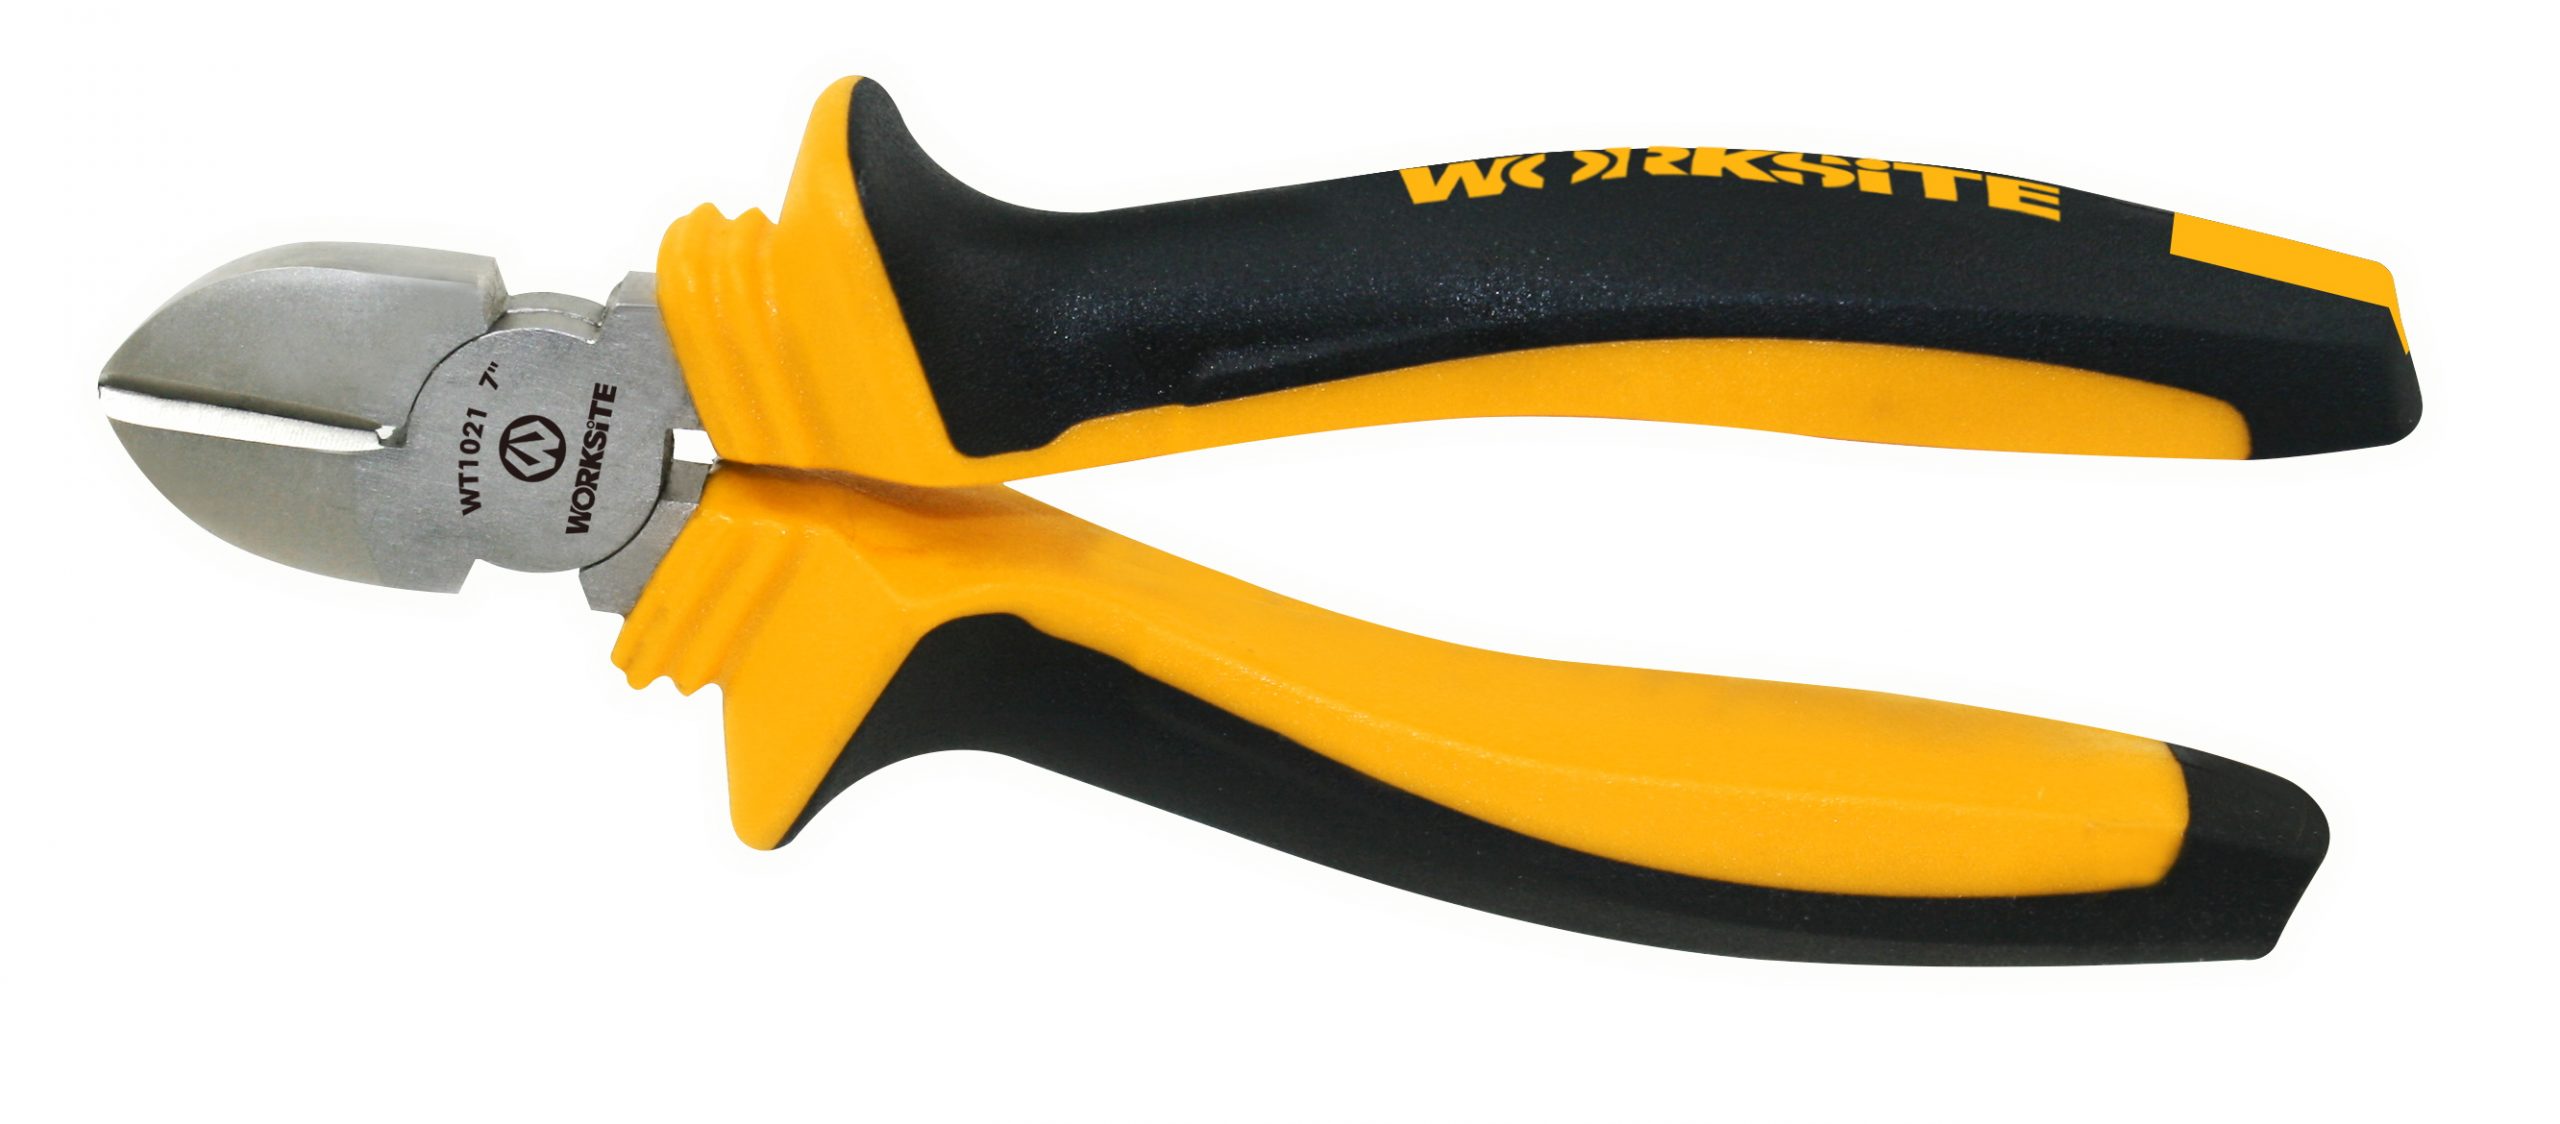 Worksite Diagonal Cutter Pliers 7inch,8inch Carbon Steel with TPR handle. Side Cutting Pliers is a Wire Stripper/Crimper/Cutter. Easy control with non slip handle. Works as a wire stripper, a wire cutter, paper cutter, trimming plastic products WT1021/WT1034